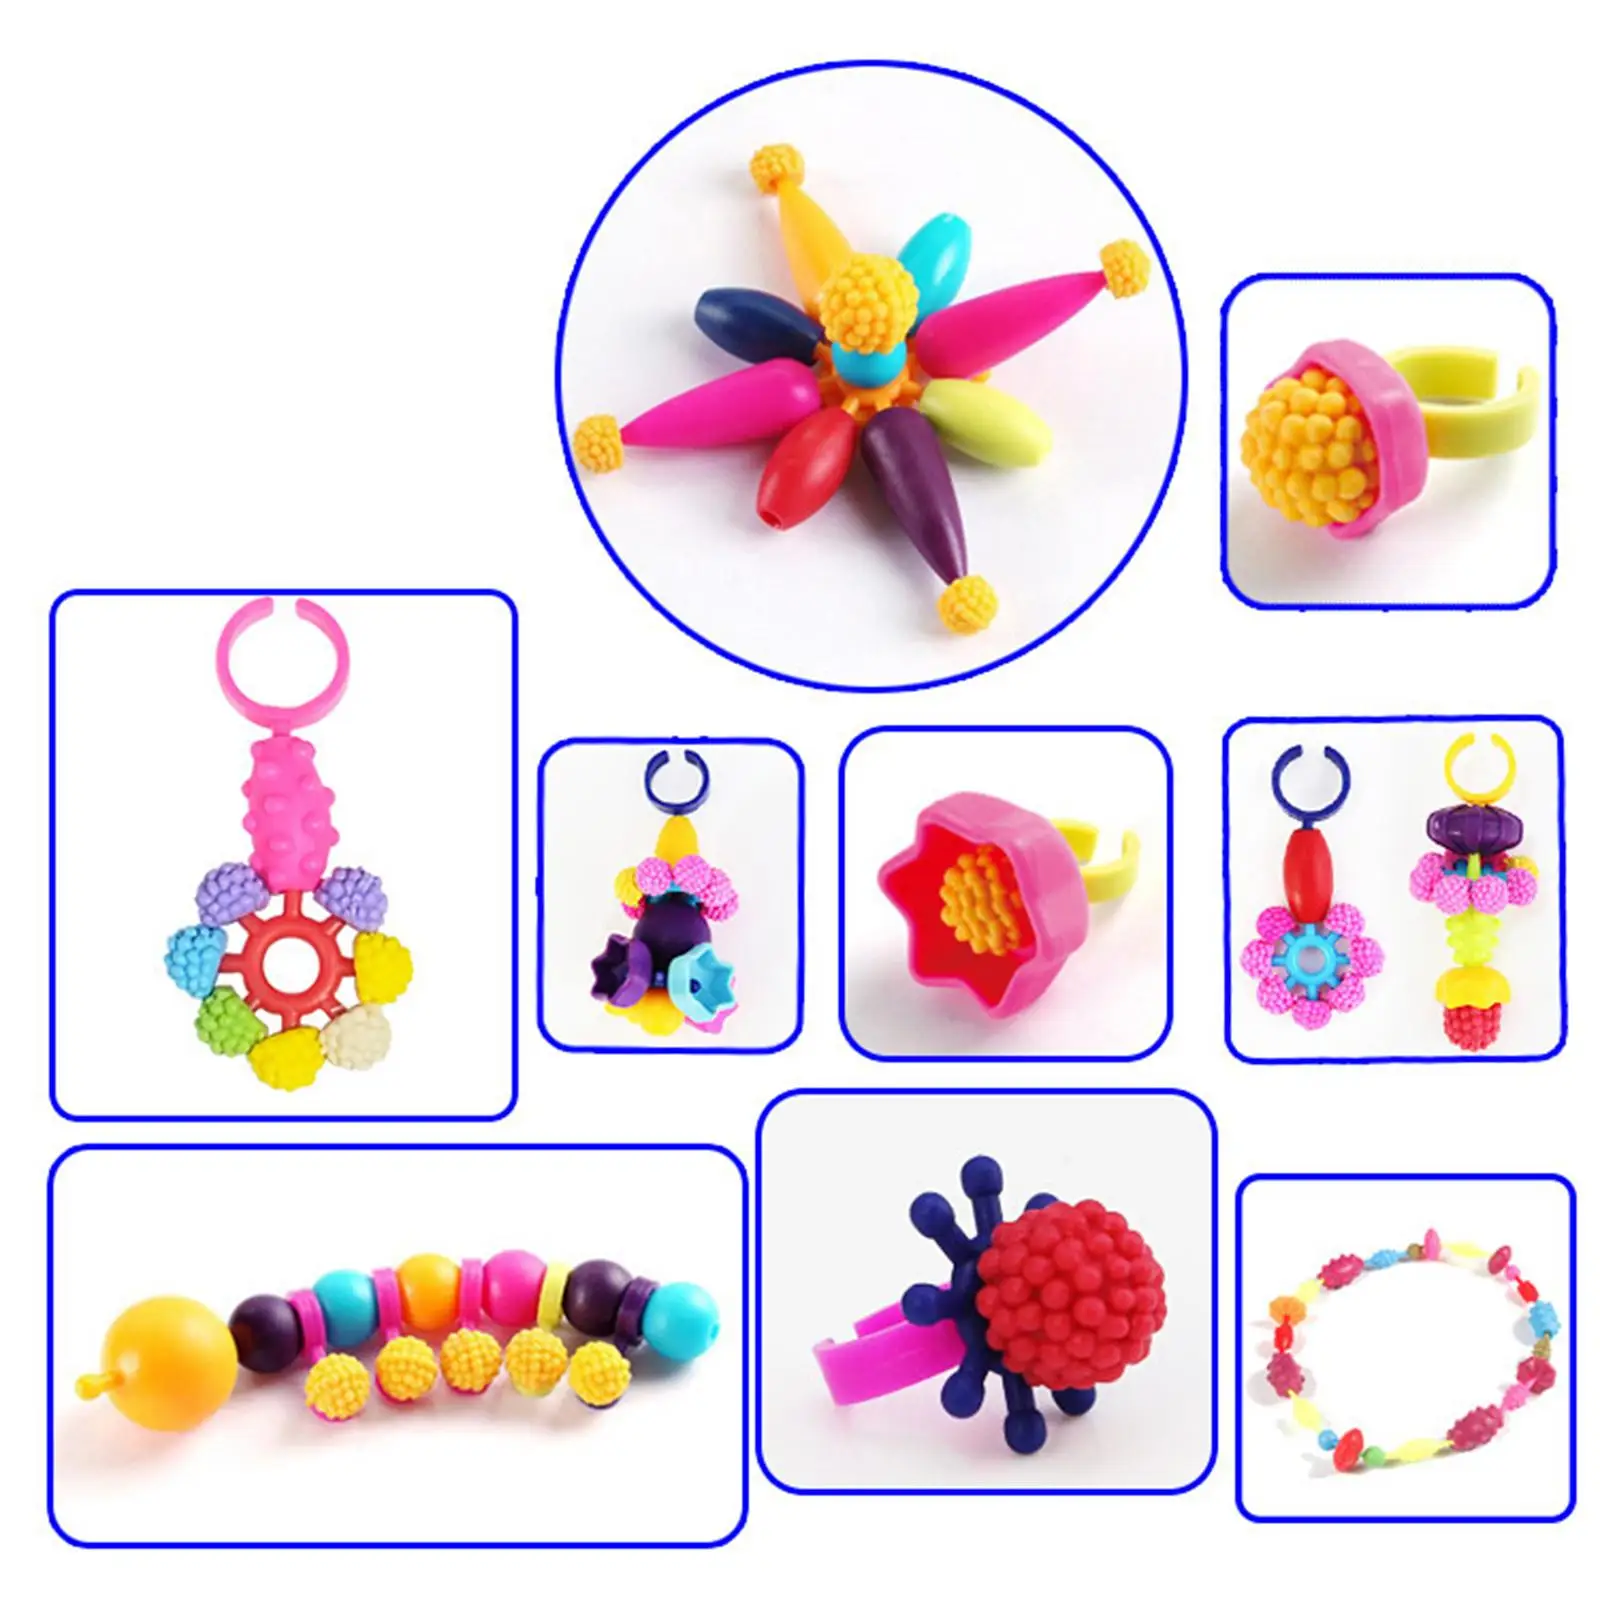 Beads Jewelry Making DIY Arts Jewelry Set Snap Together Beads Crafts Toys for Earrings Bracelet Hairband Children Birthday Gift